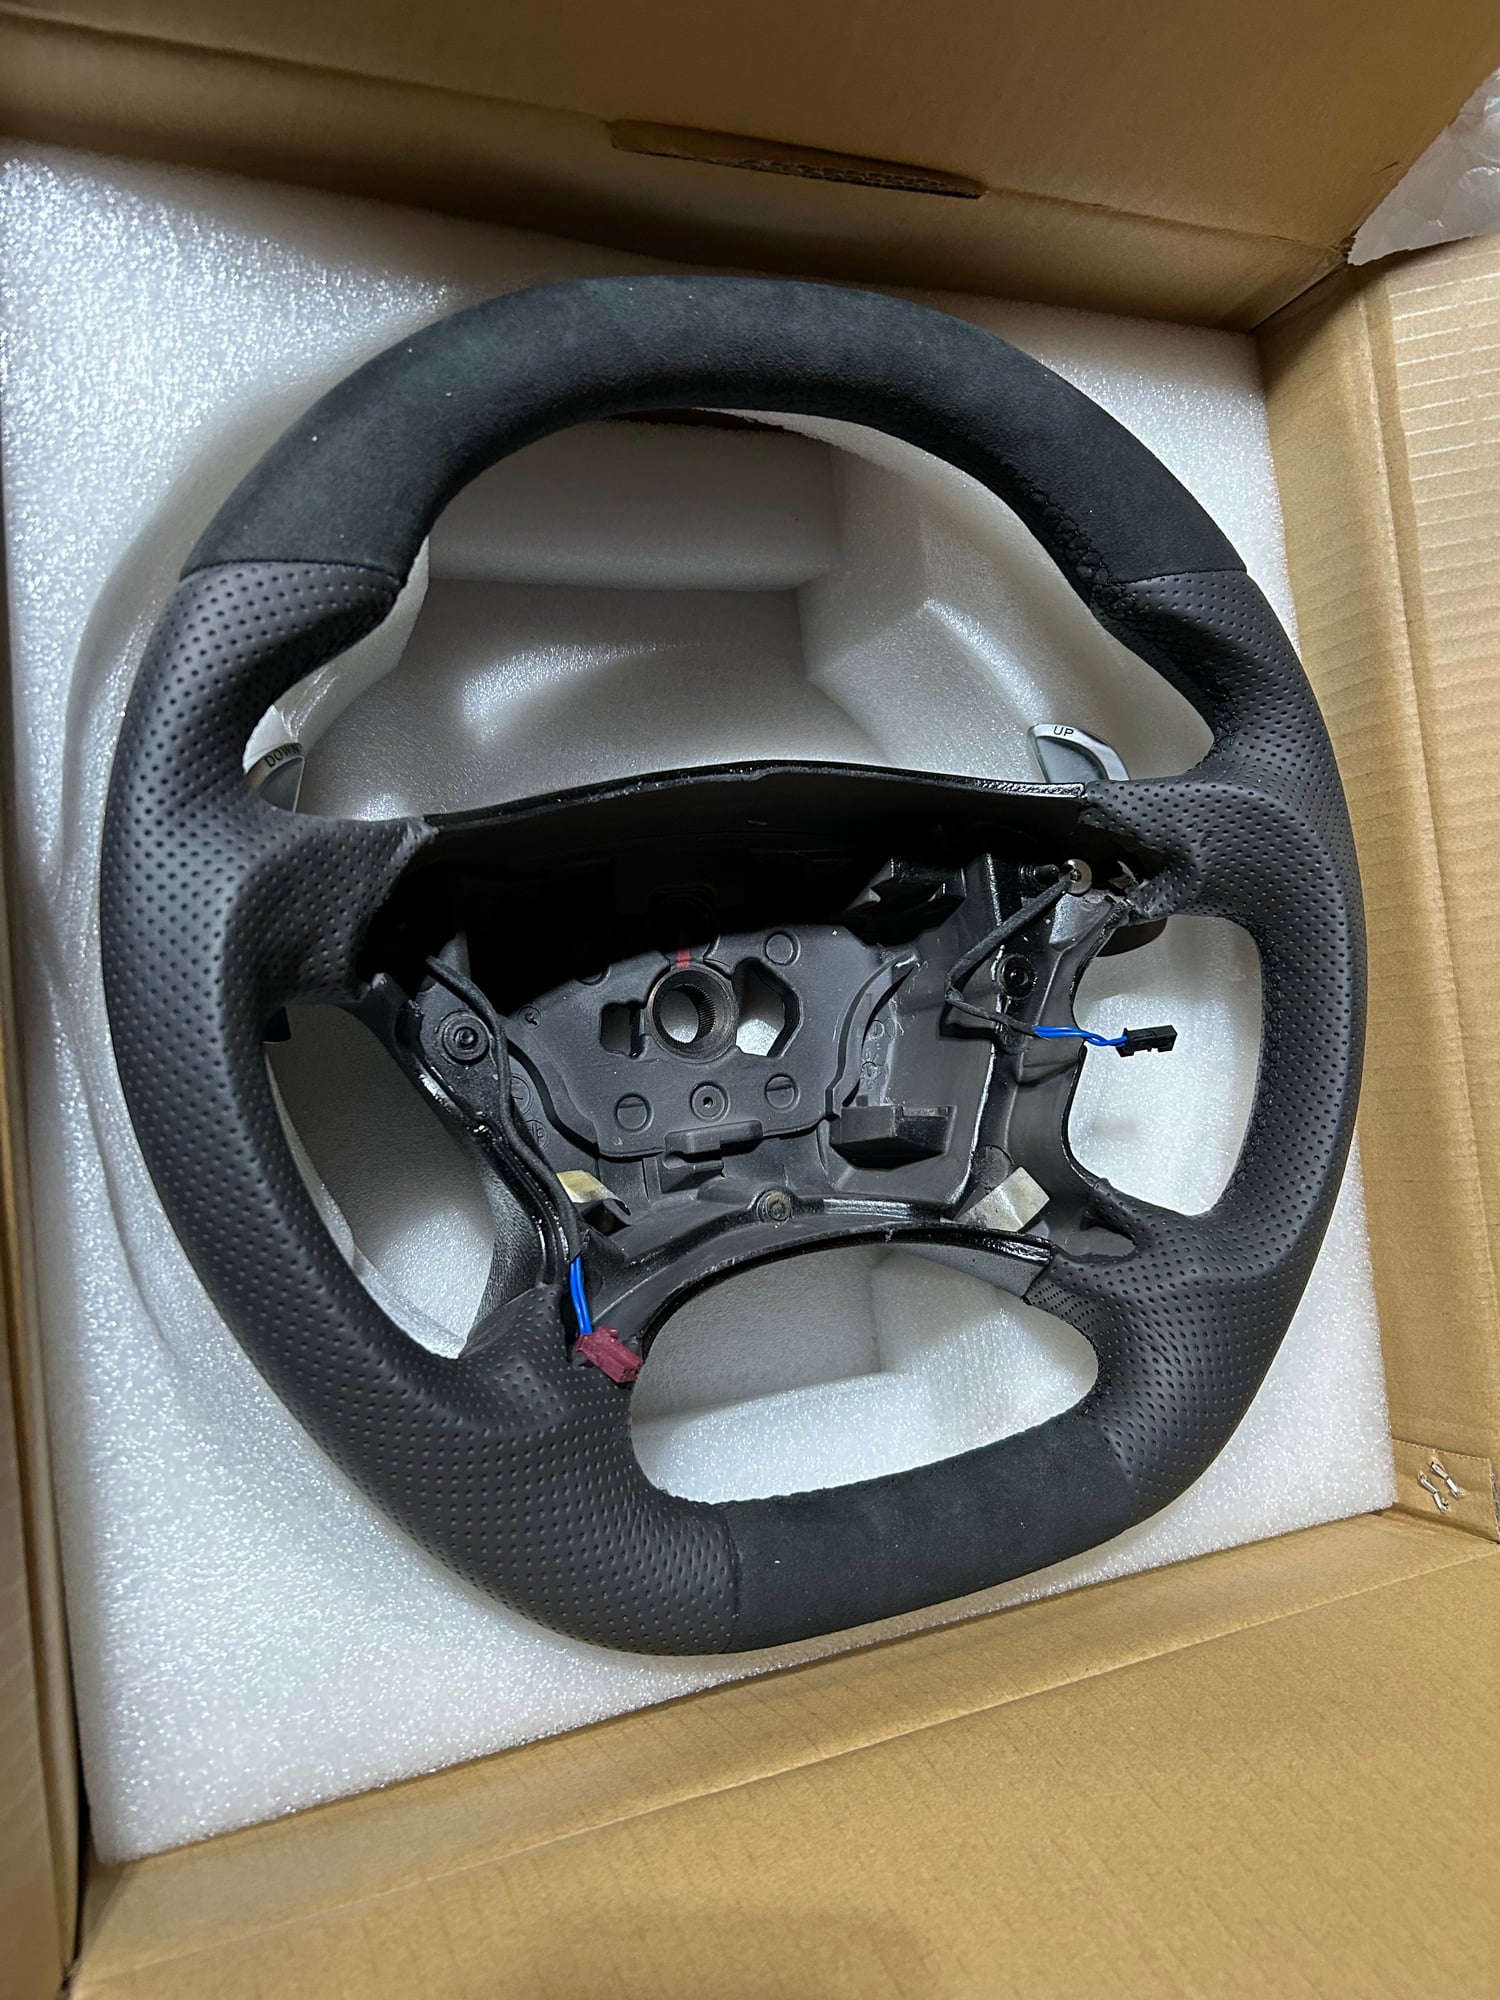 Interior/Upholstery - W211 facelift/w219 steering wheel - New - 2007 to 2009 Mercedes-Benz E63 AMG - 2006 to 2008 Mercedes-Benz CLS55 AMG - Mechanic Falls, ME 04256, United States